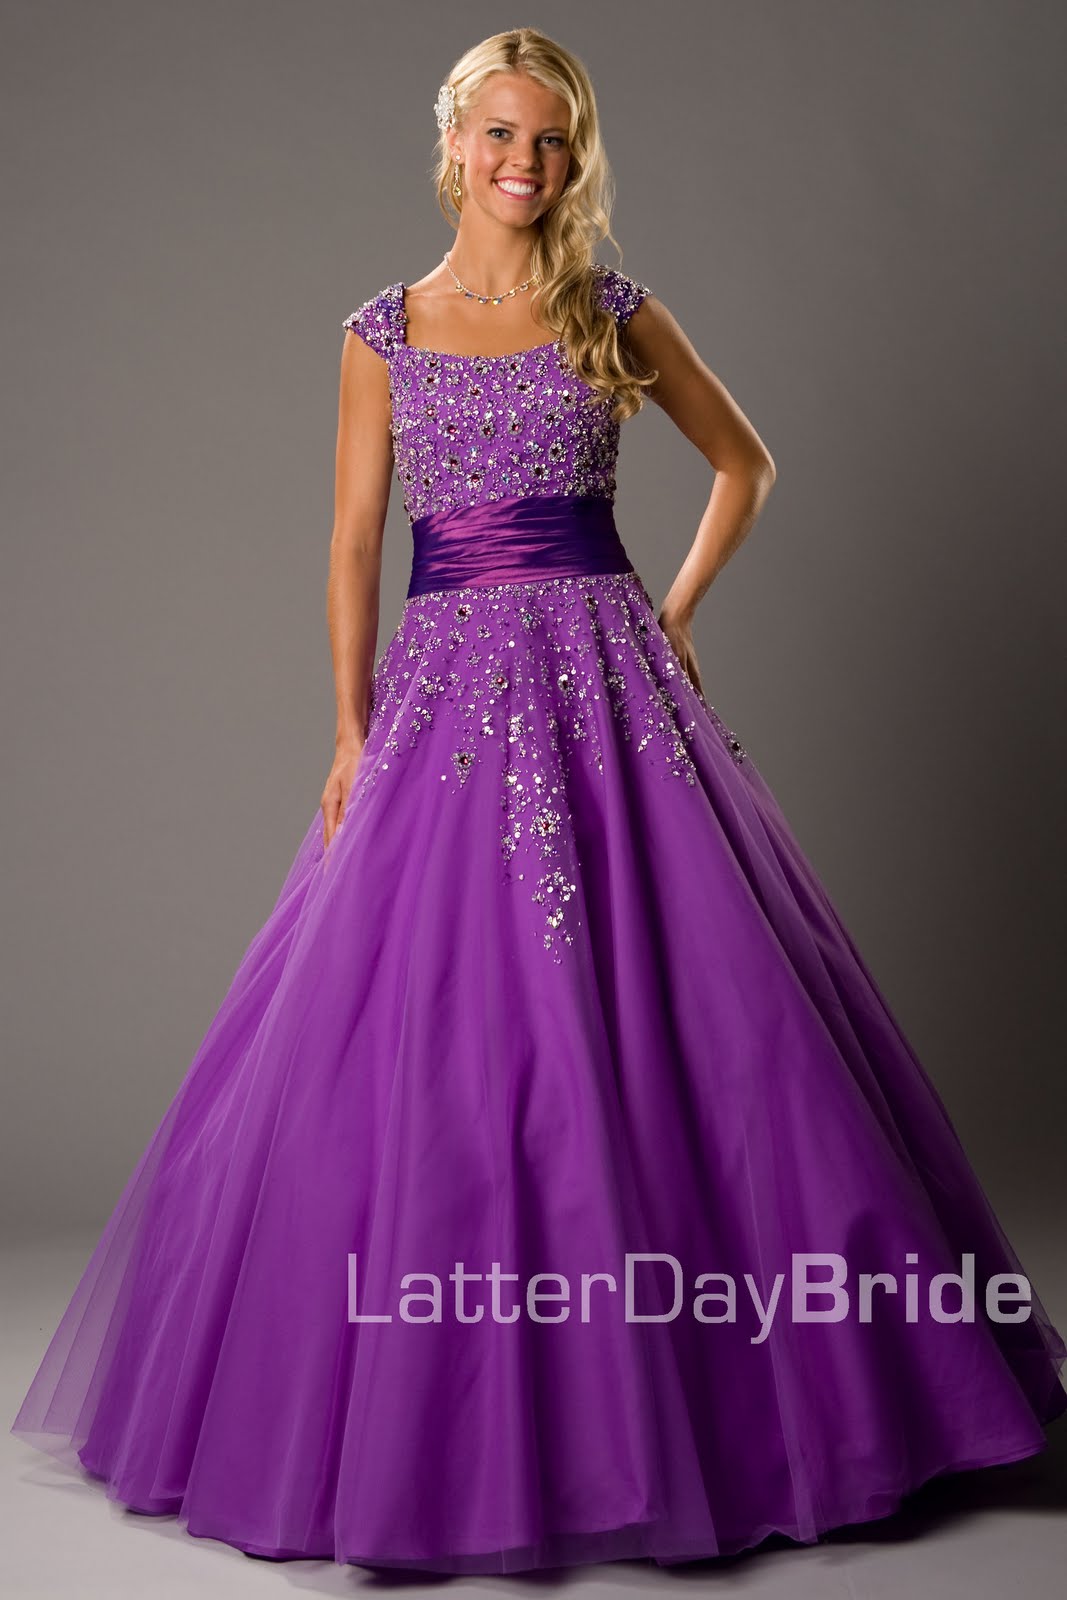 Mod Style Lounge: Pretty in a Prom Dress!